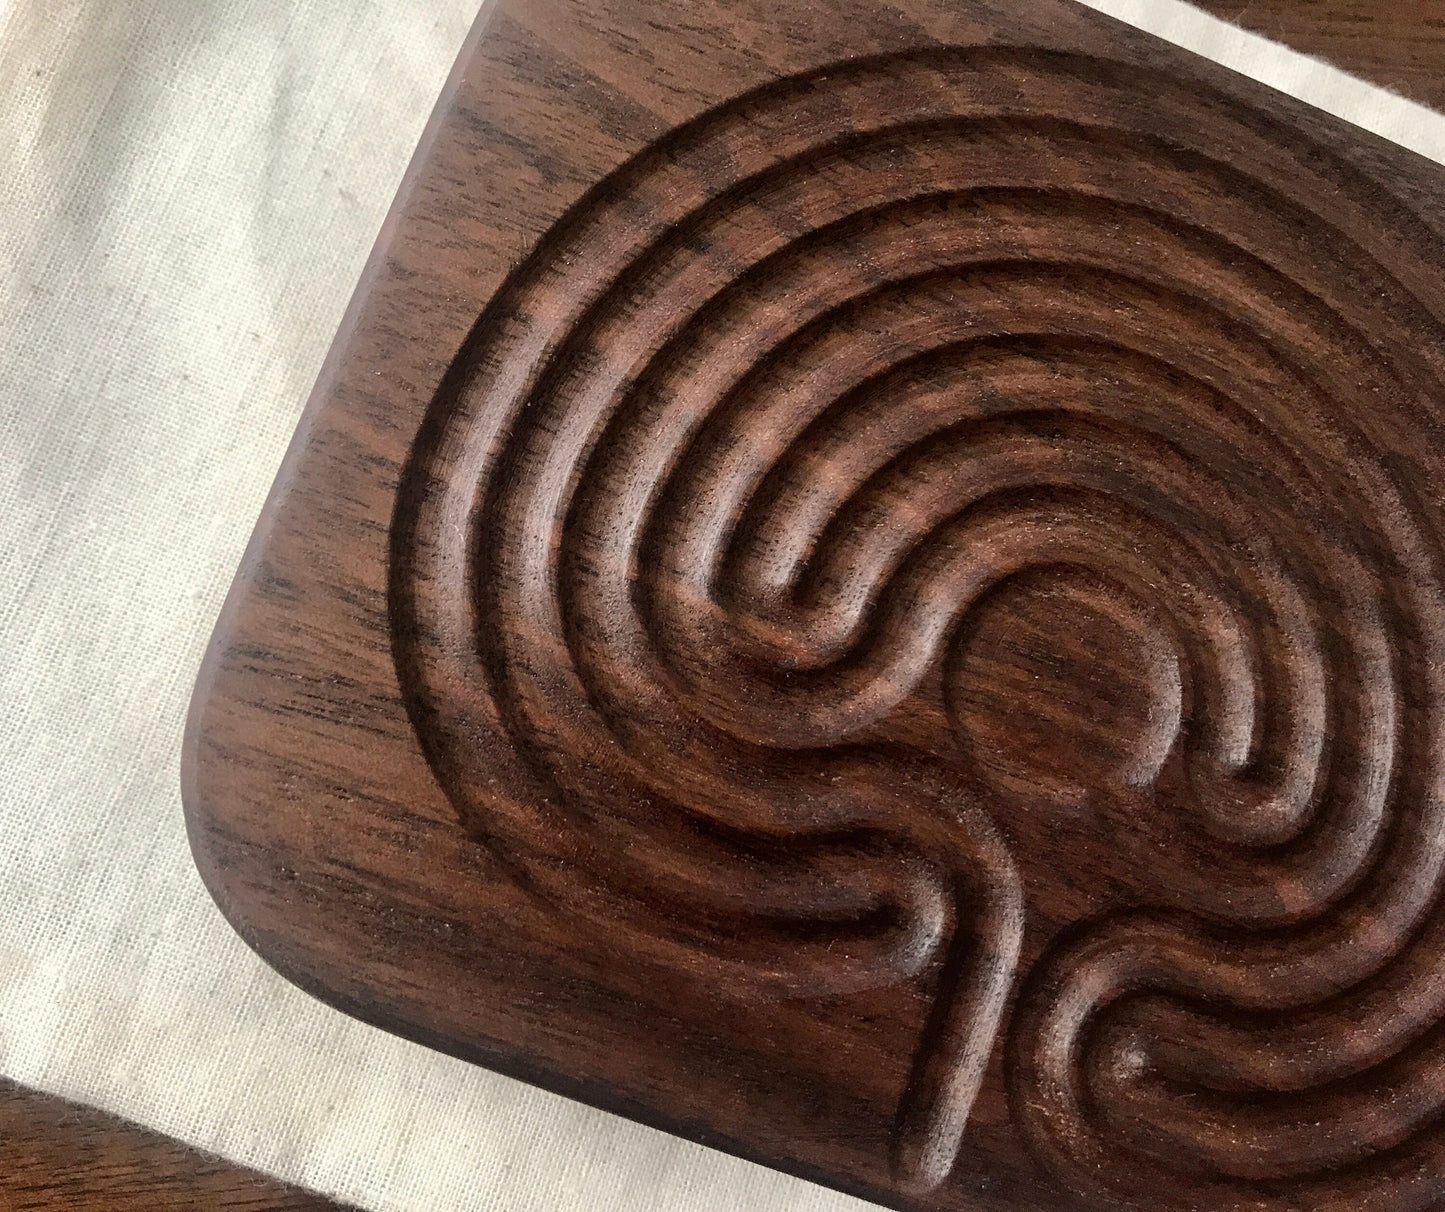 Small Classical Finger Labyrinth, Walnut Wood, 4.75" by 3.75"